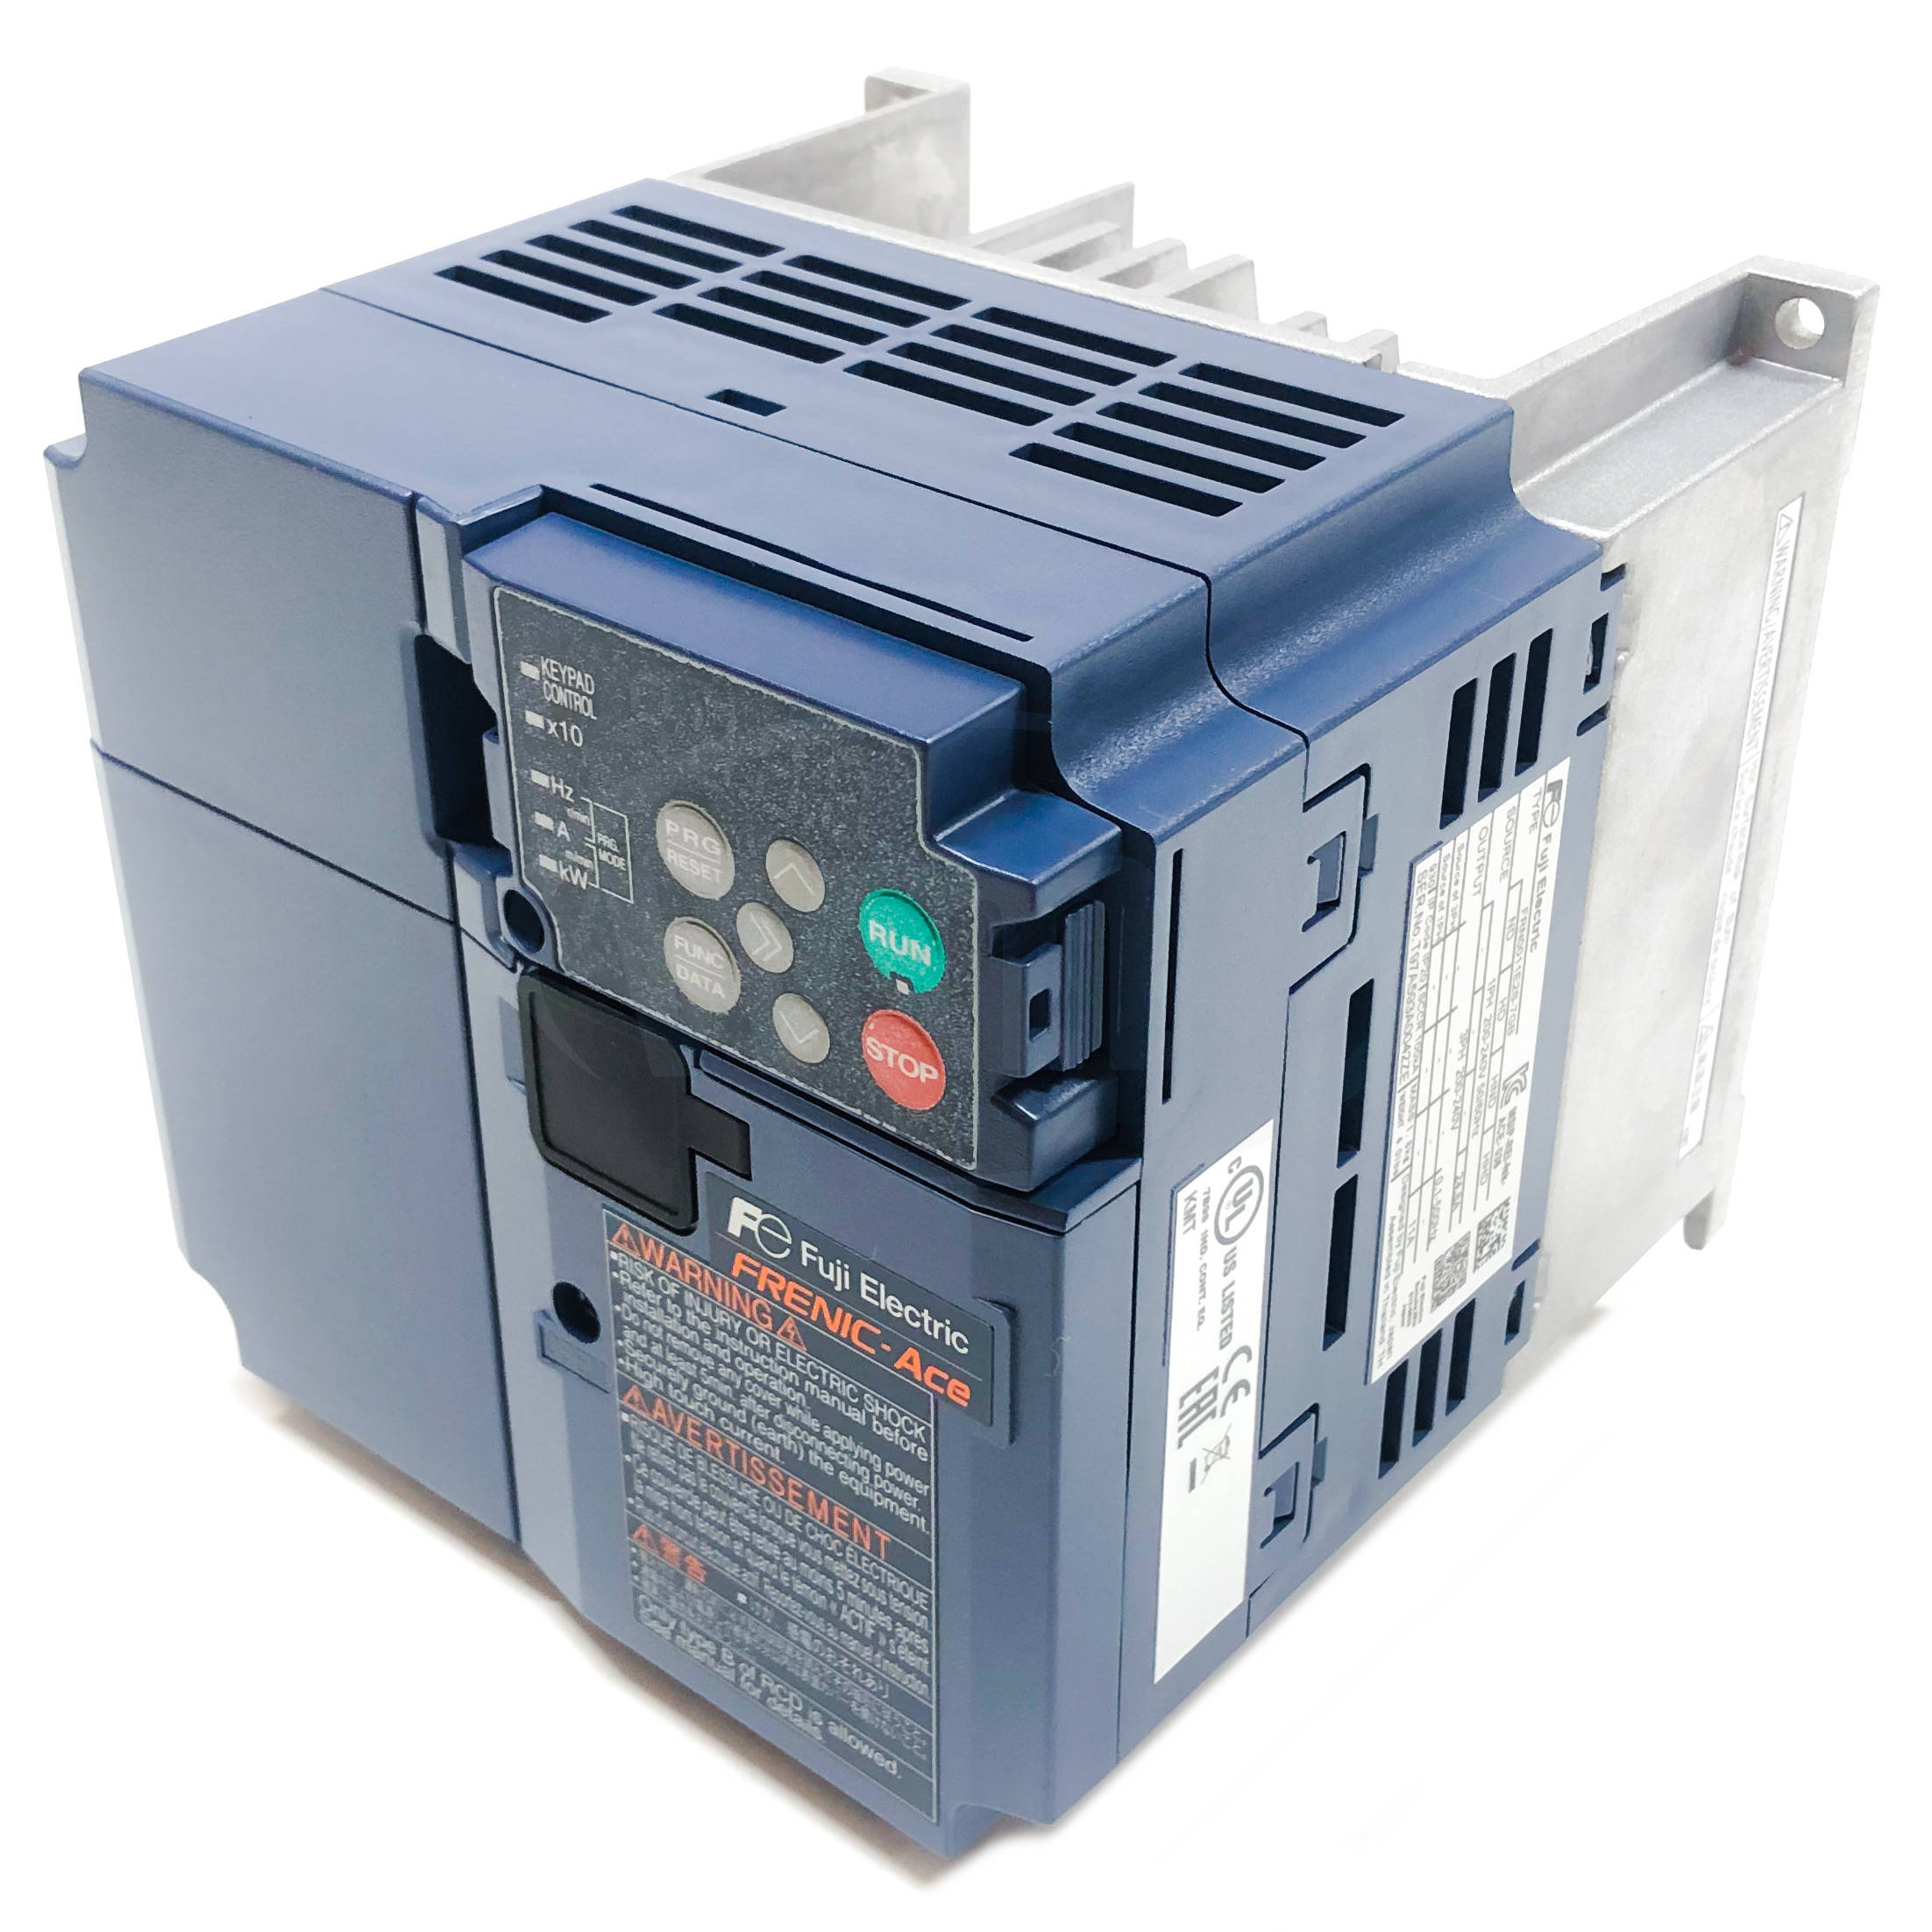 New ACE Fincor KL Series ACE-KL-460V-3P-1HP Variable Frequency Drive Free Ship 